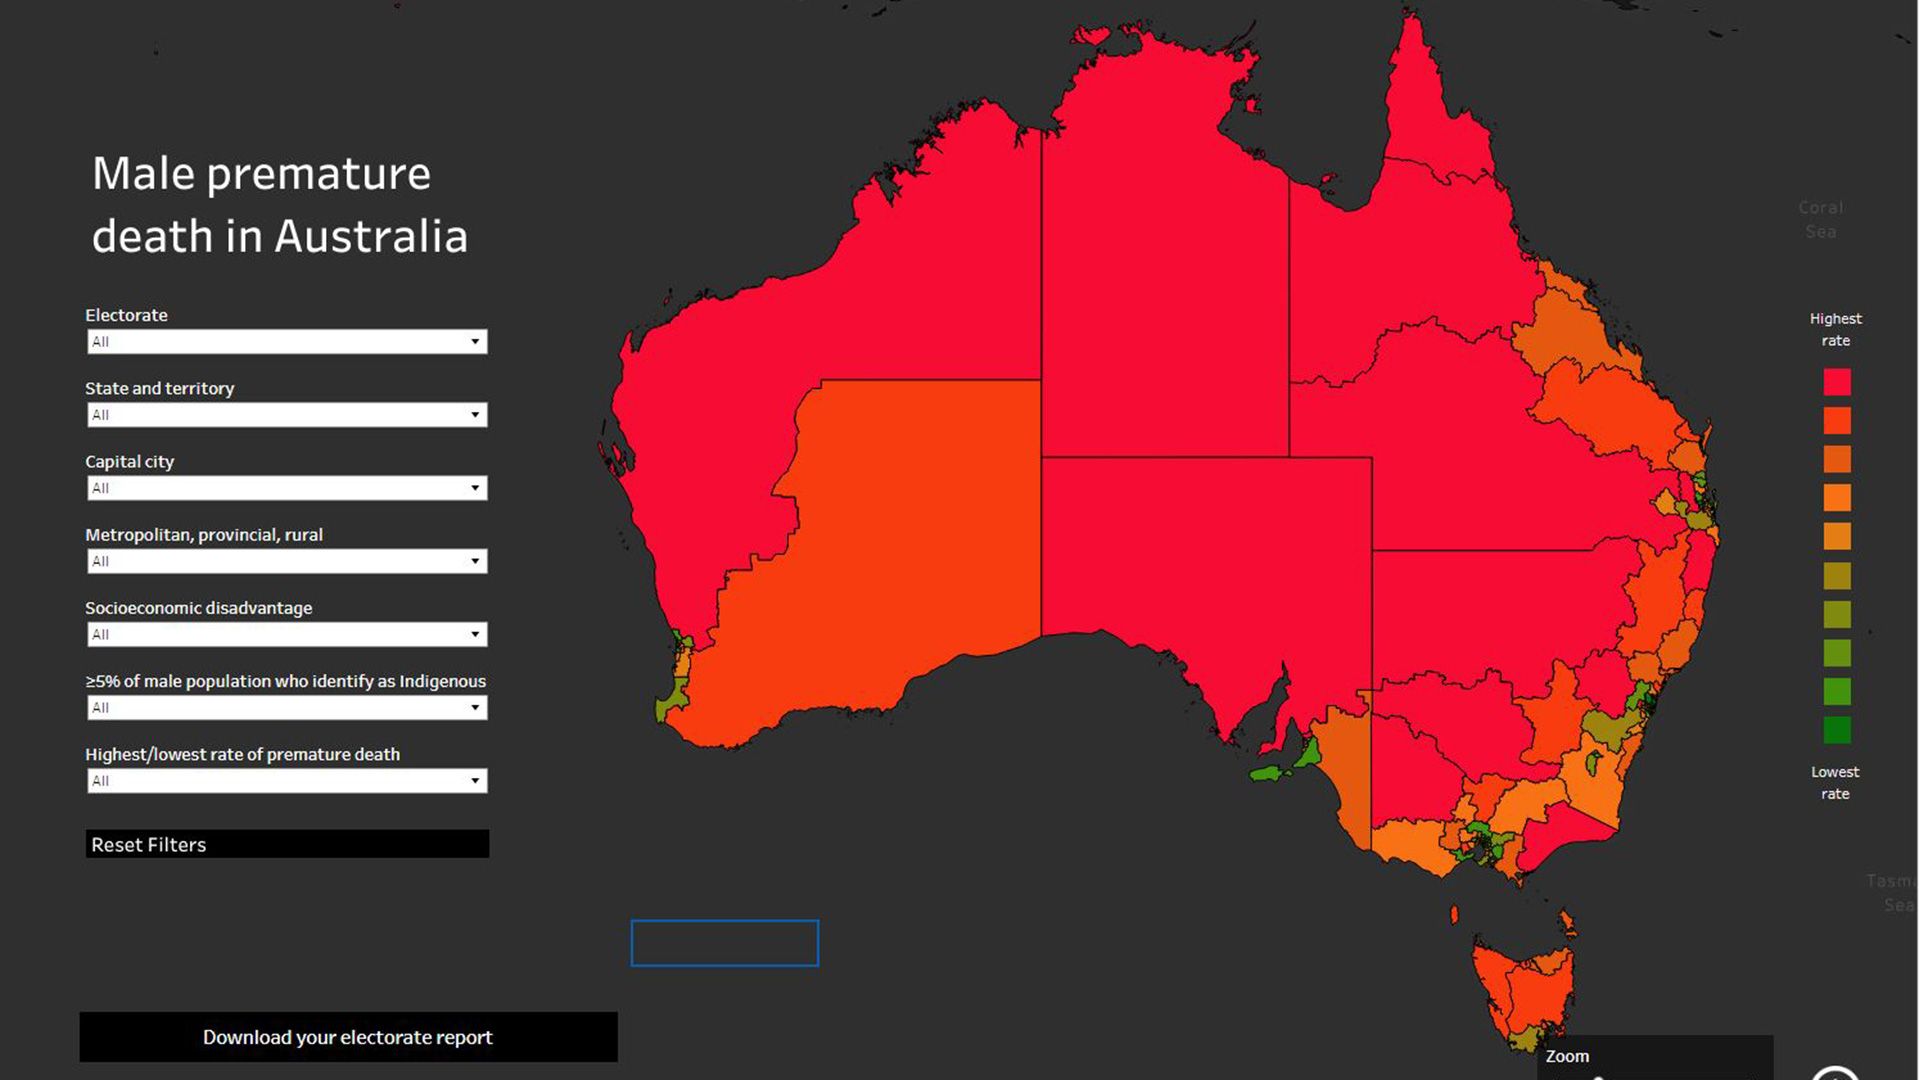 Colour-coded map of Australia showing male premature mortality rates across electorates.